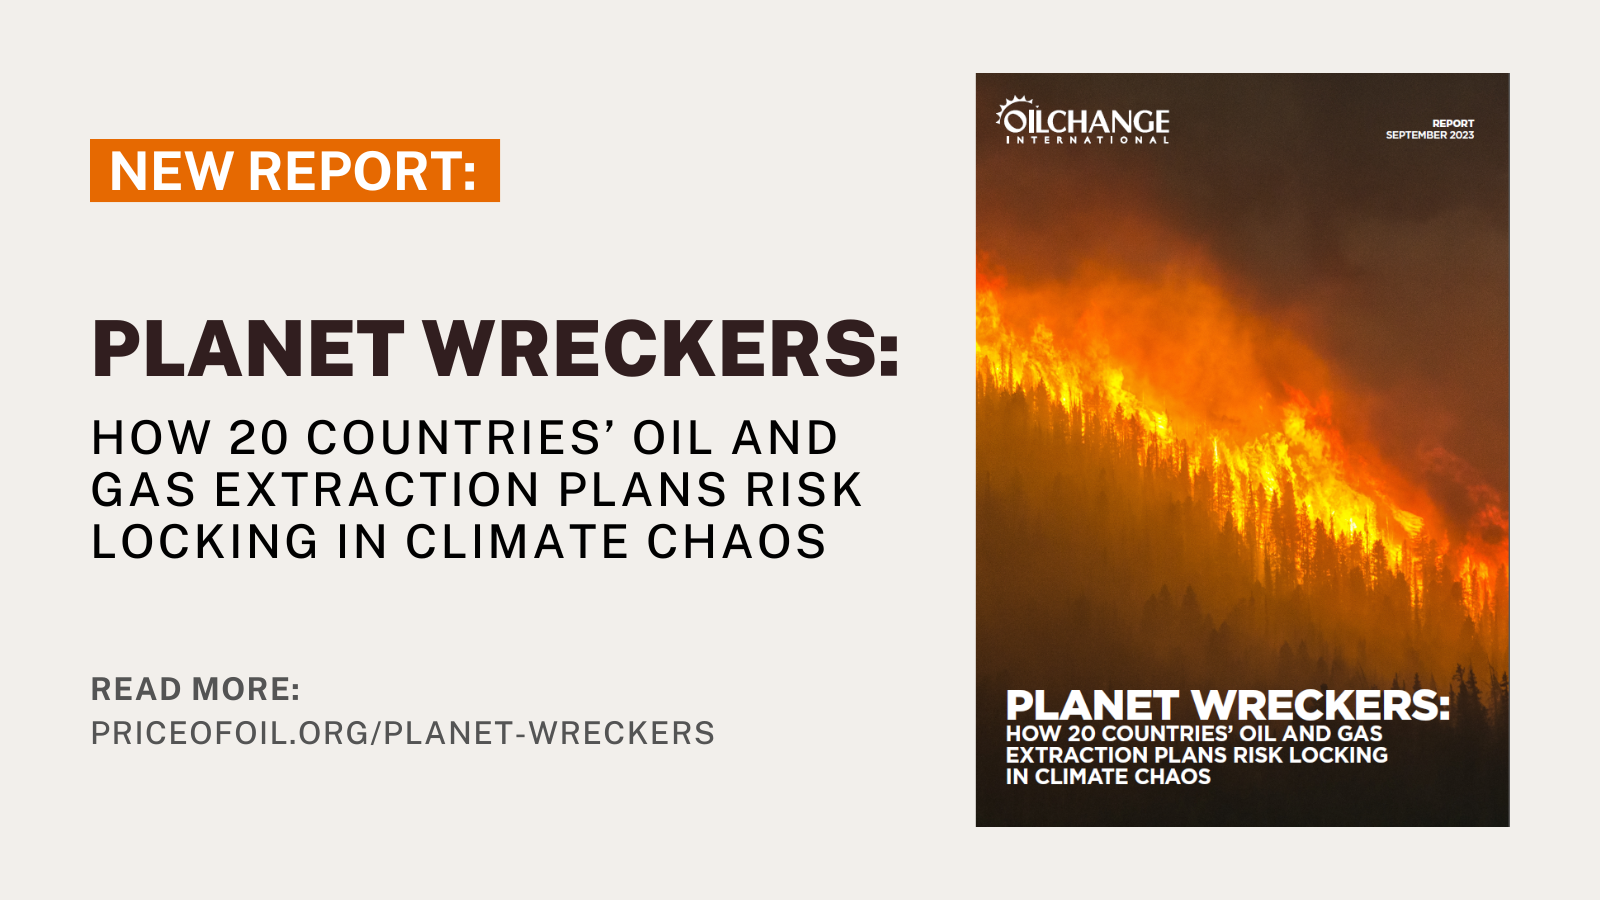 Planet Wreckers: How 20 Countries’ Oil and Gas Extraction Plans Risk Locking in Climate Chaos